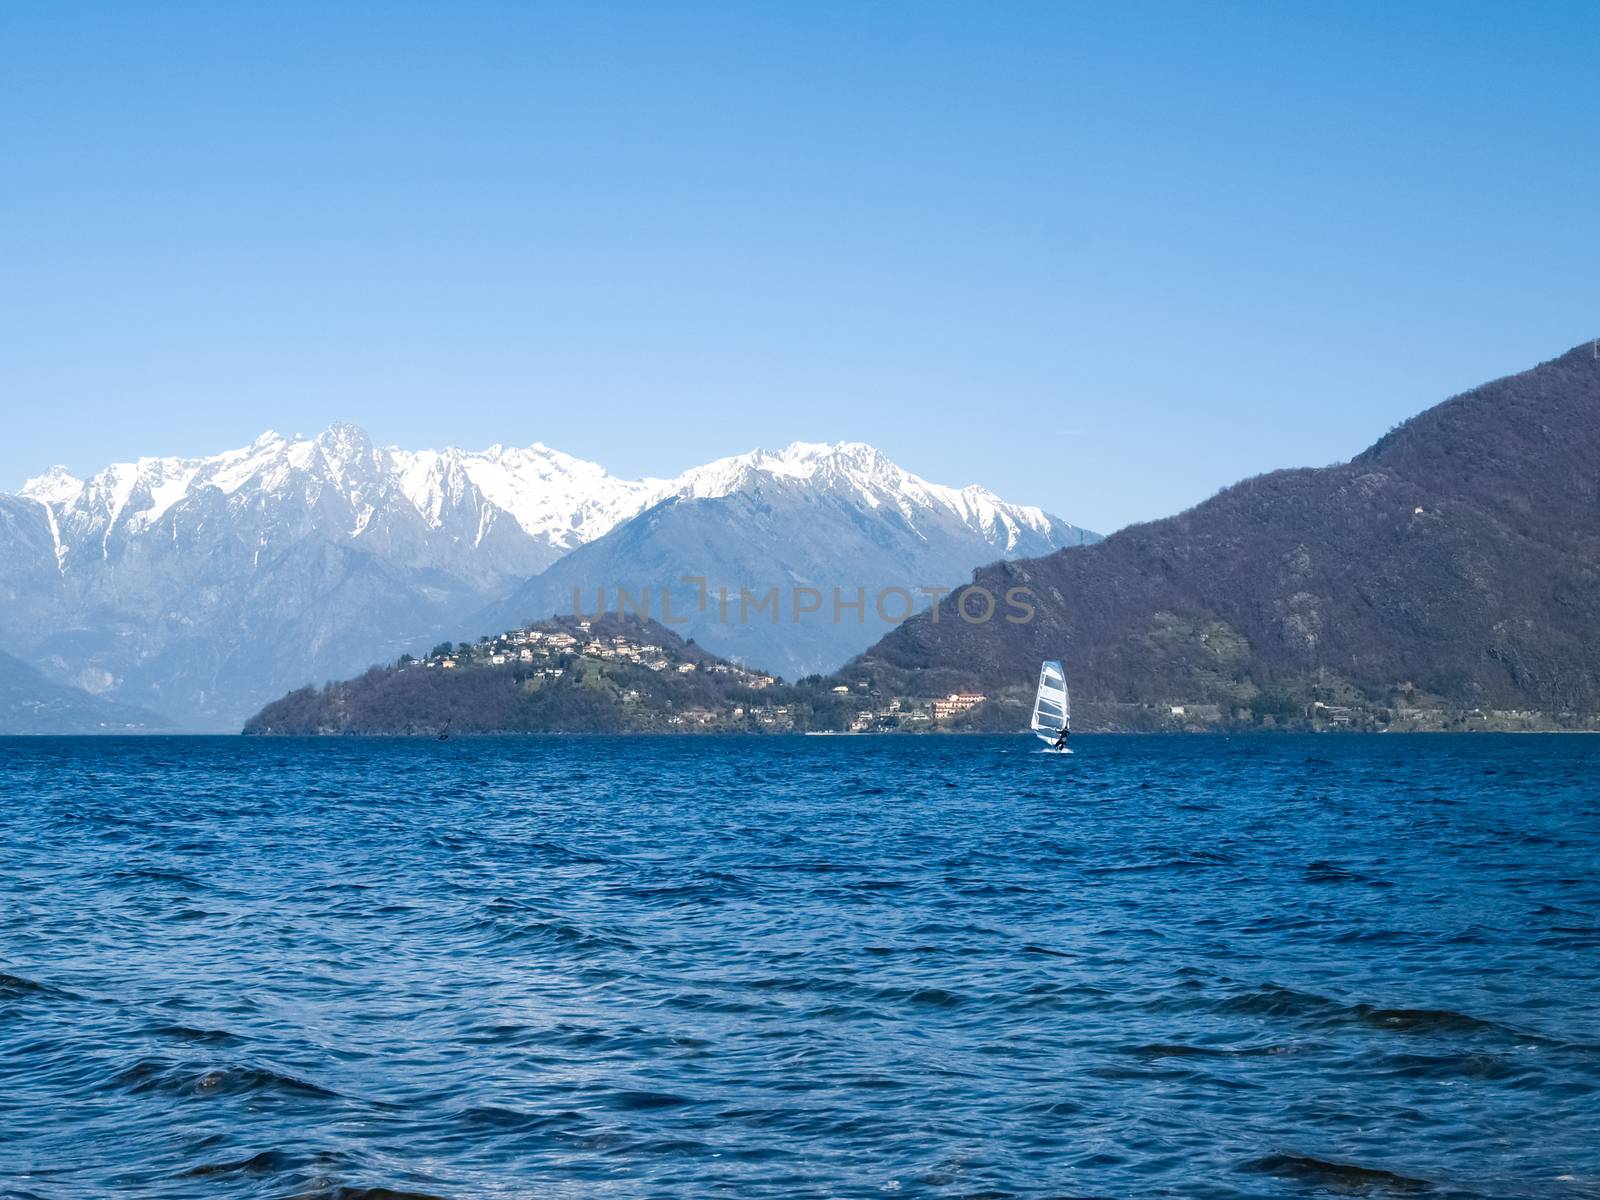 Pianello del Lario, Como - Italy: Windsurfer sailing on the lake and in the background you can see the peninsula of Piona and mountains